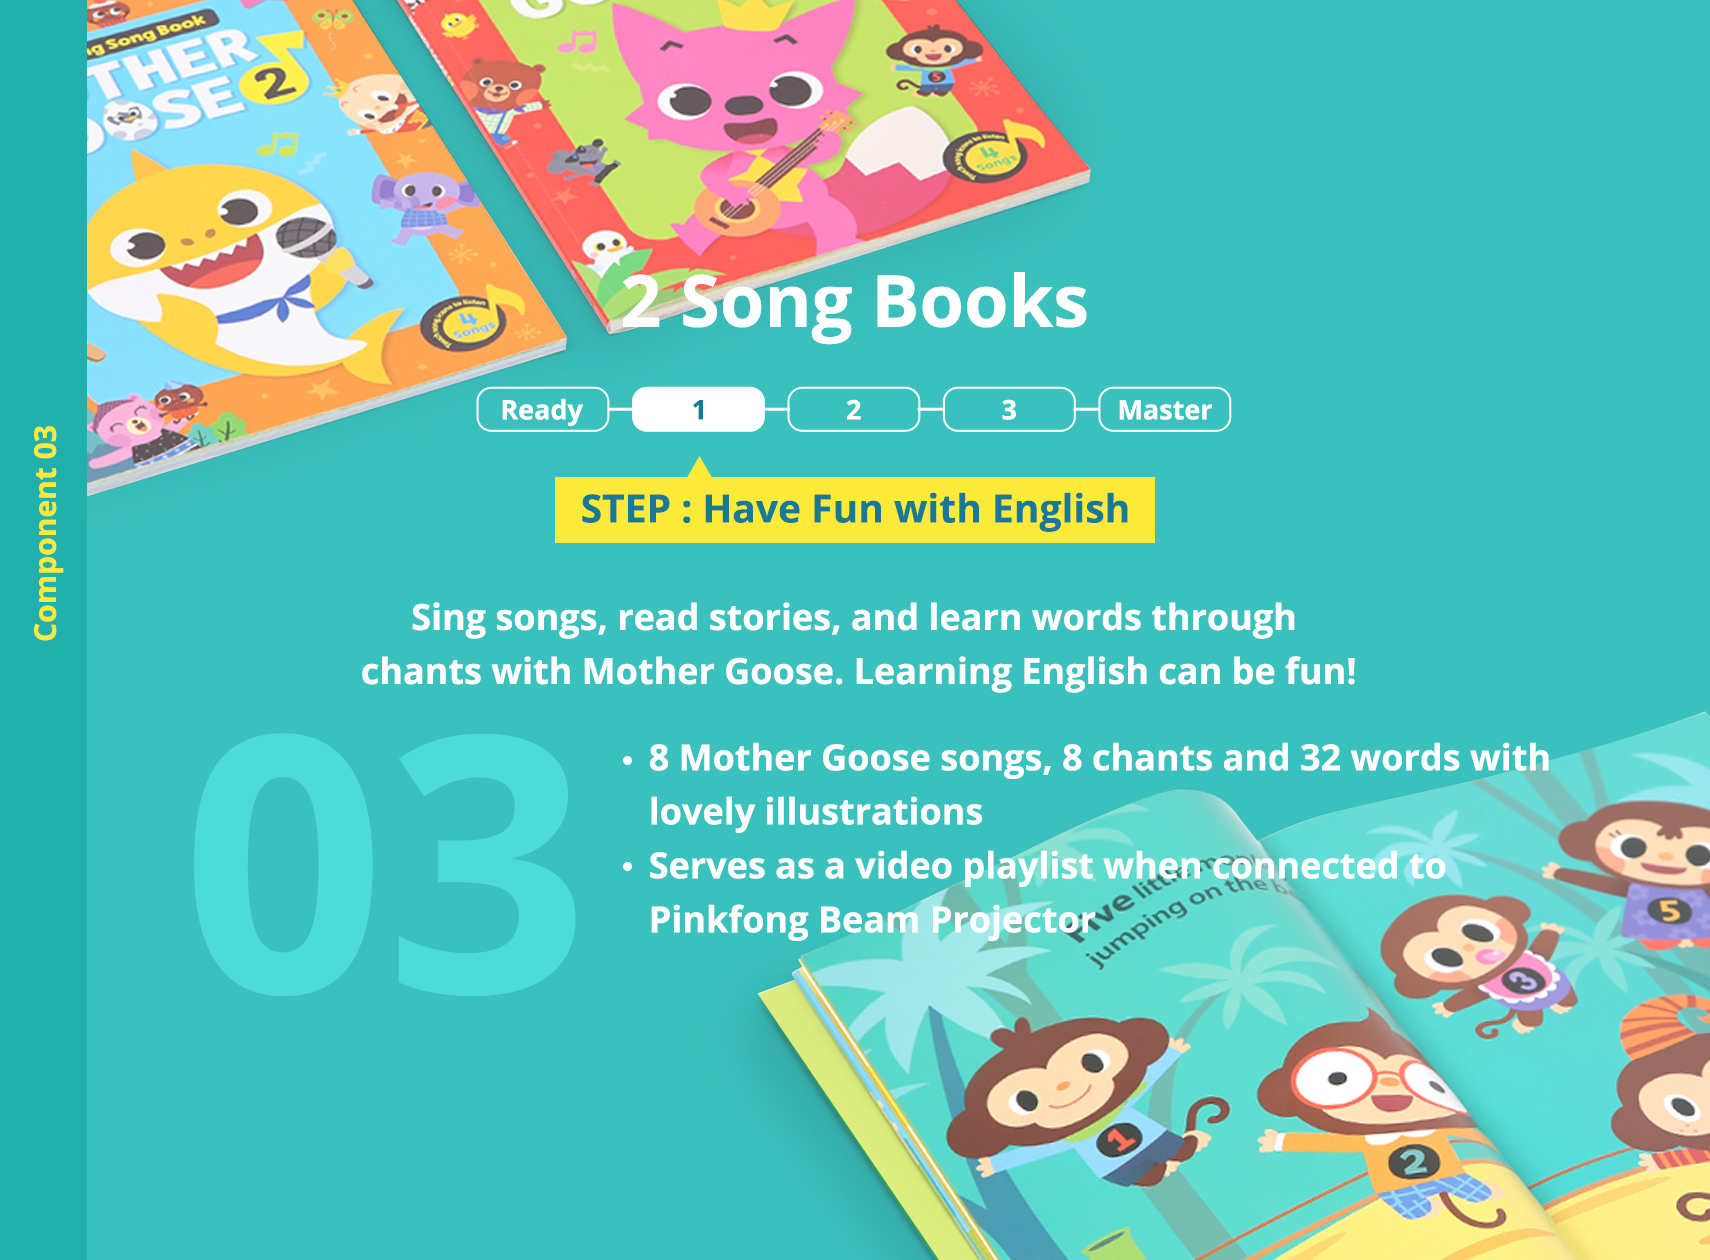 STEP : Have Fun with English. Sing songs, read stories, and learn words through chants with Mother Goose. Learning English can be fun!